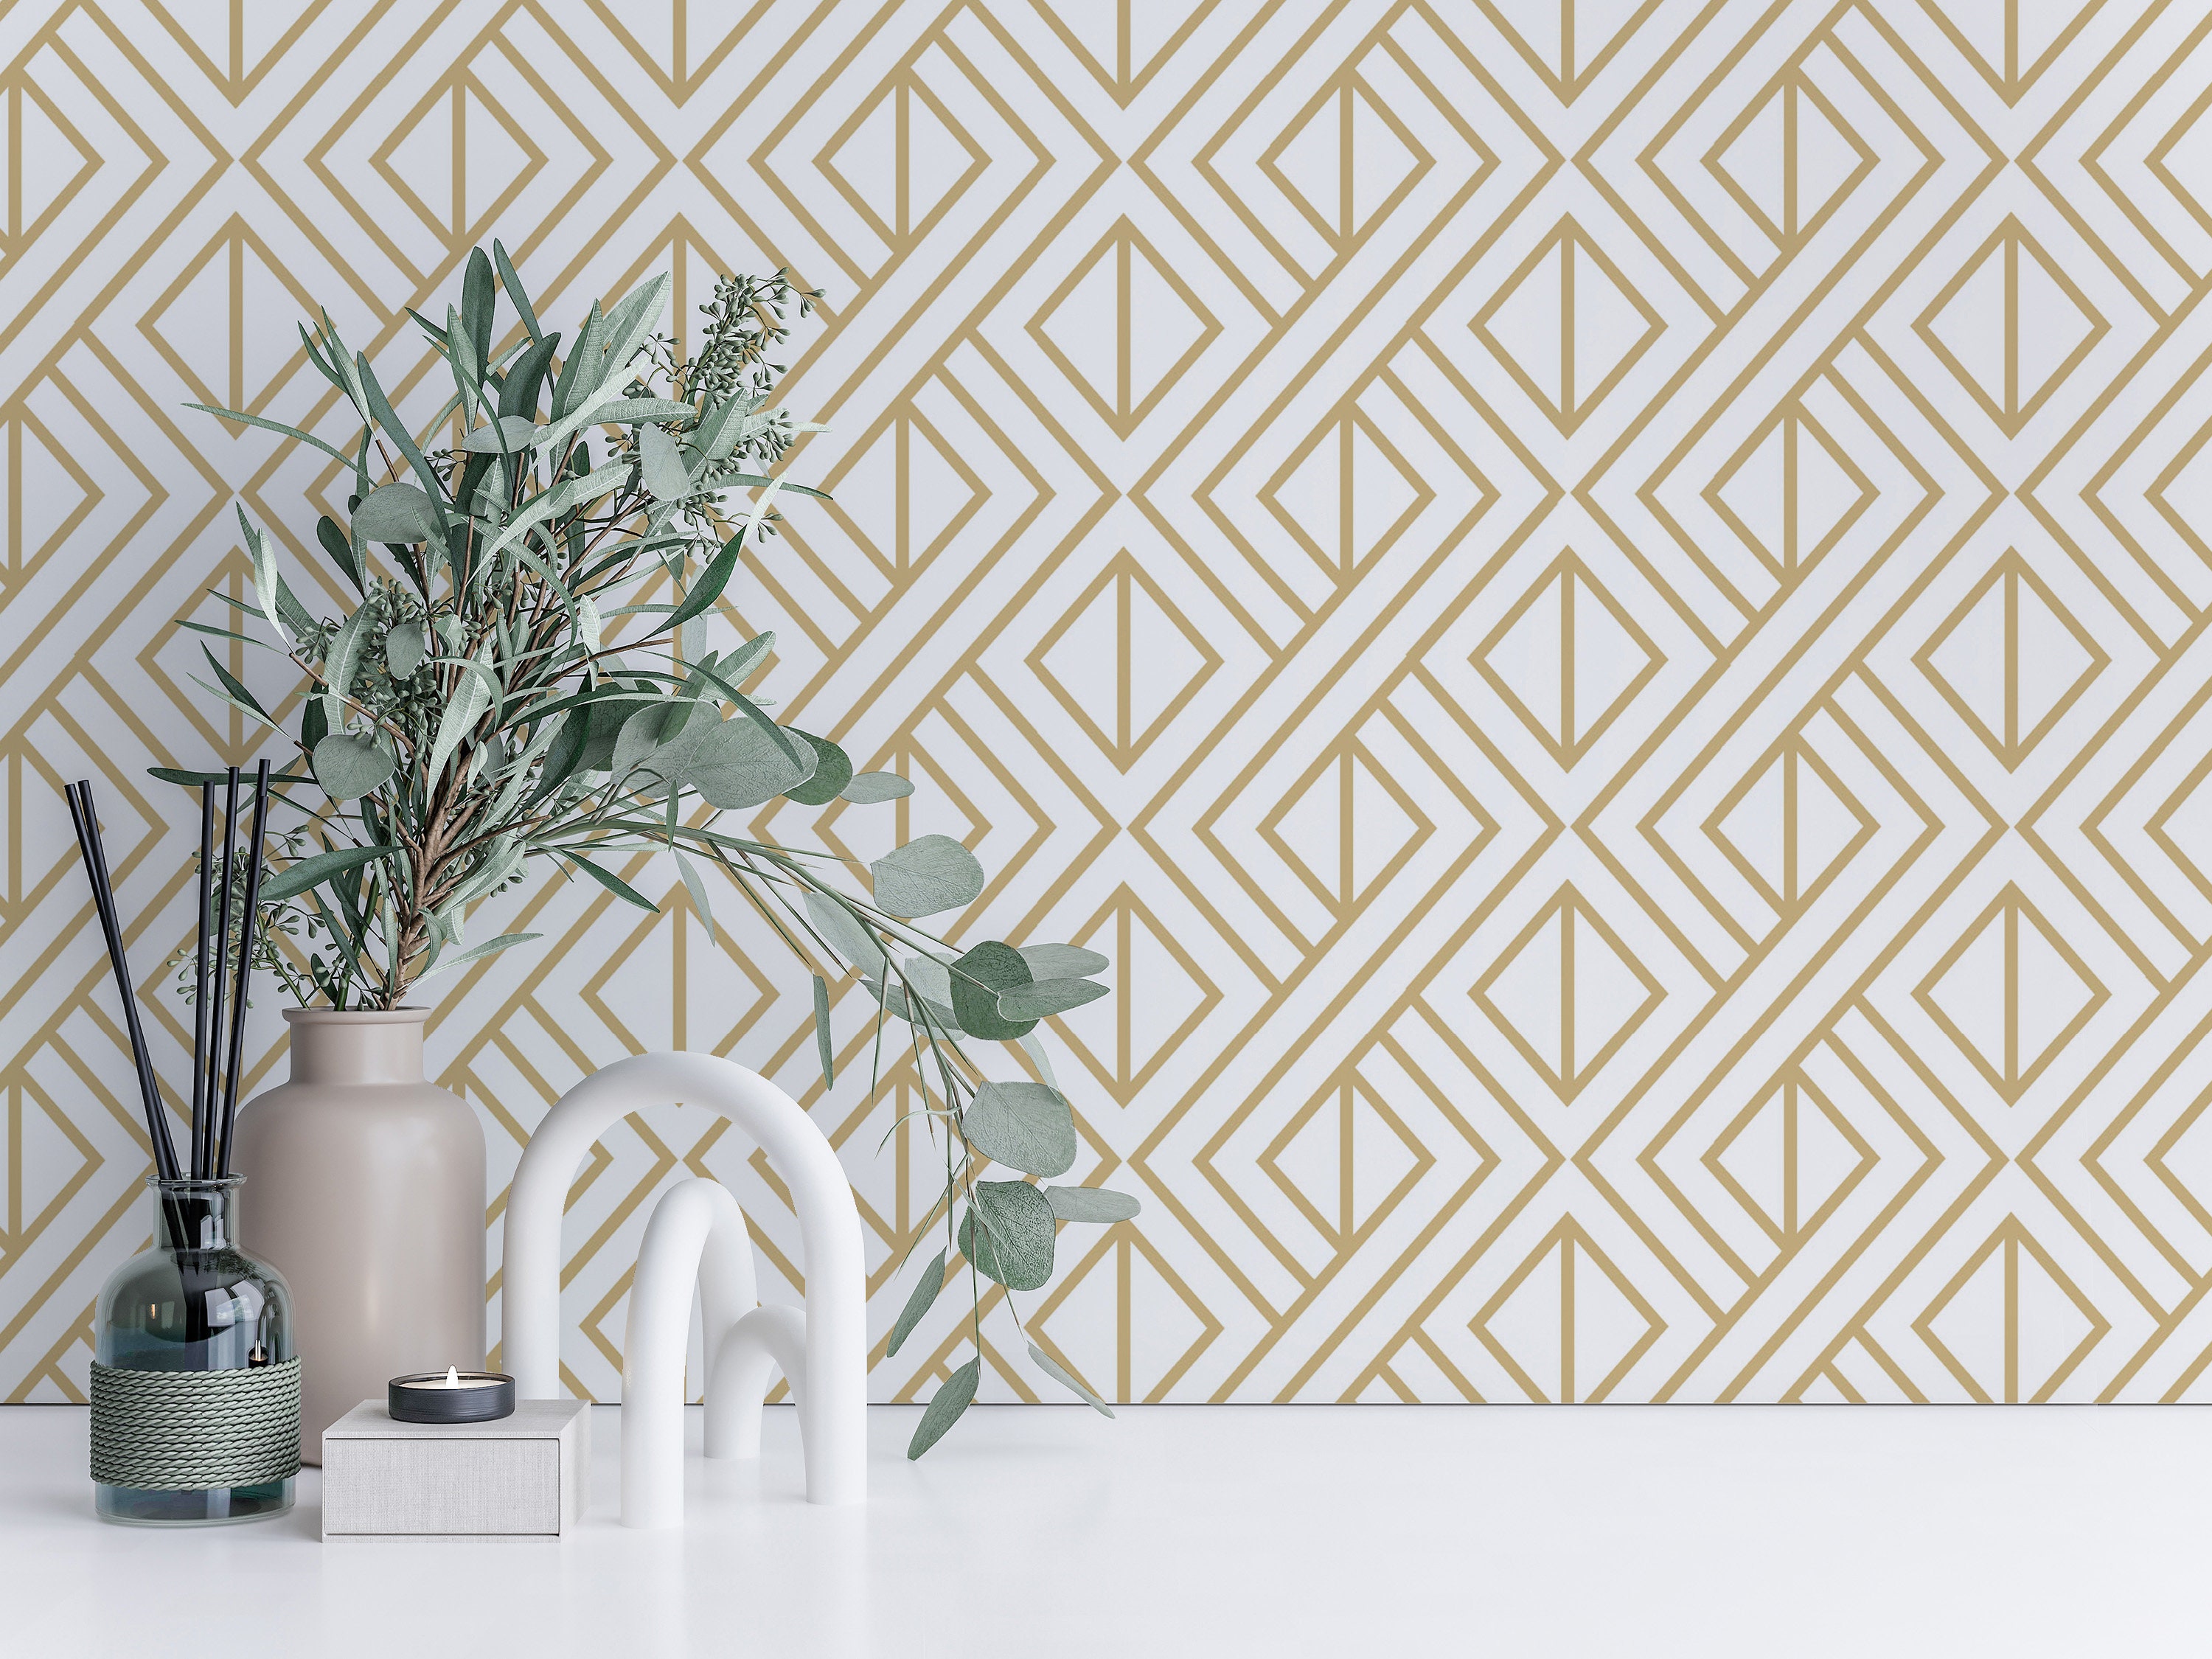 Peel and Stick Wallpaper Gold and White Peel and Stick Wallpaper Geometric  Stripe Contact Paper Self Adhesive Removable Wallpaper Modern Boho Contact